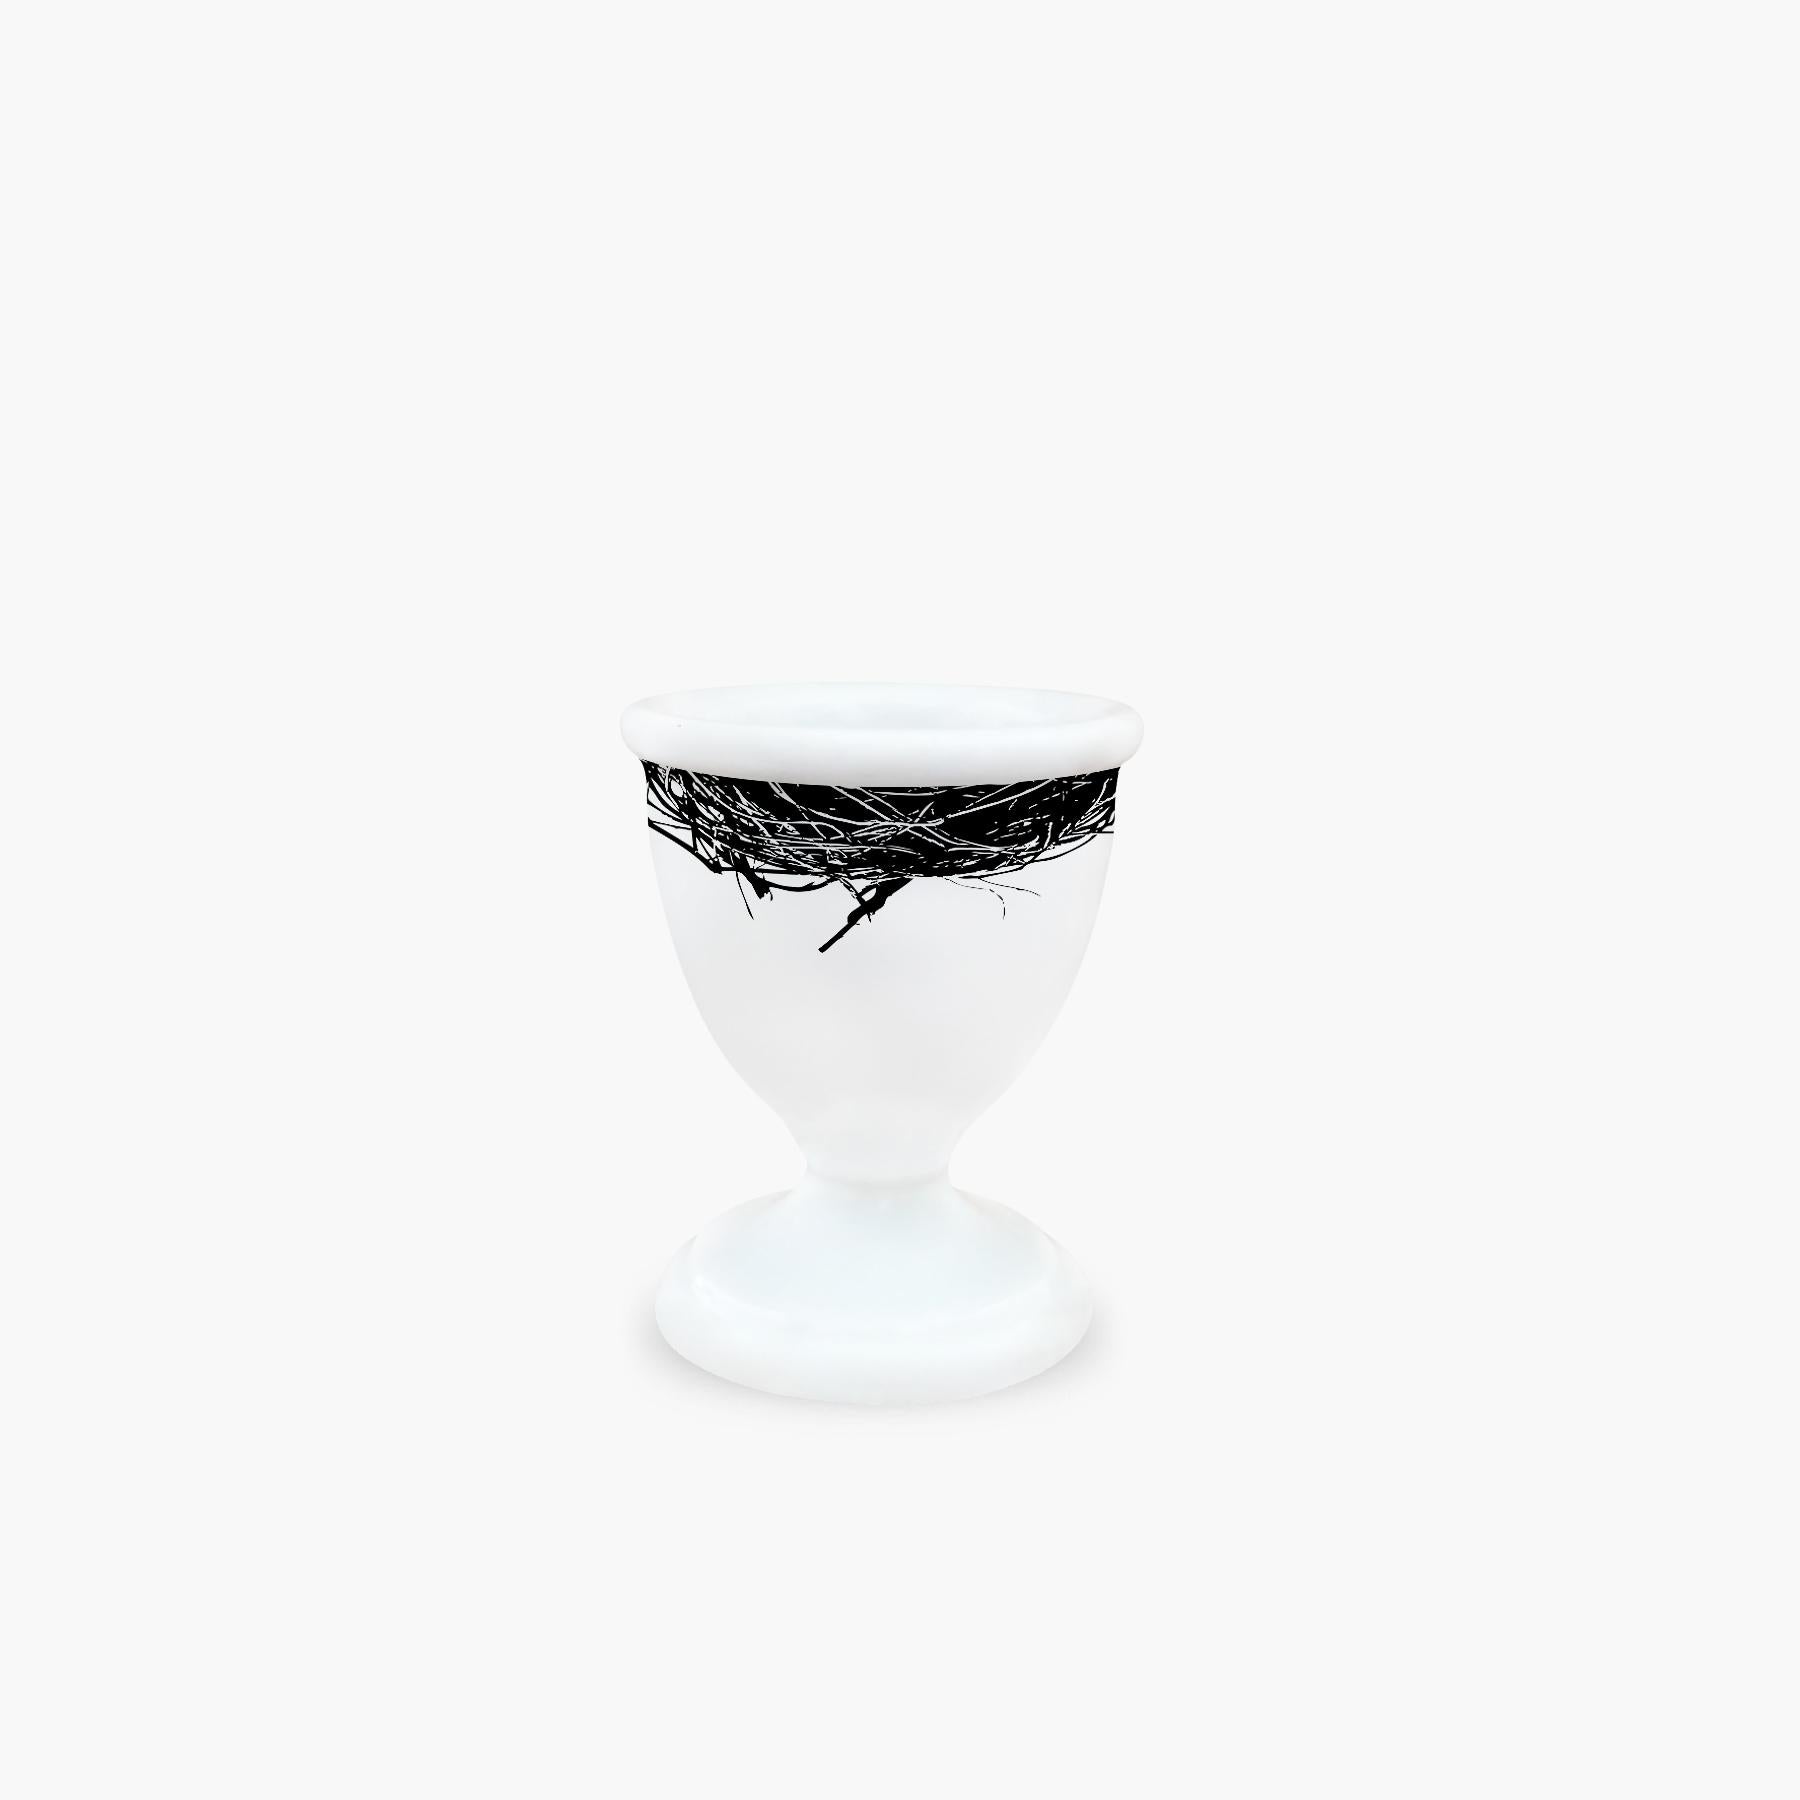 Just out of its nest, here is our first egg cup, for hot mornings with just bread and butter, endless brunches, or fancy dinners with recipes from great chefs. 

Egg cup in extra fine porcelain, white, silk-screen printed and hand laid.
Measures: